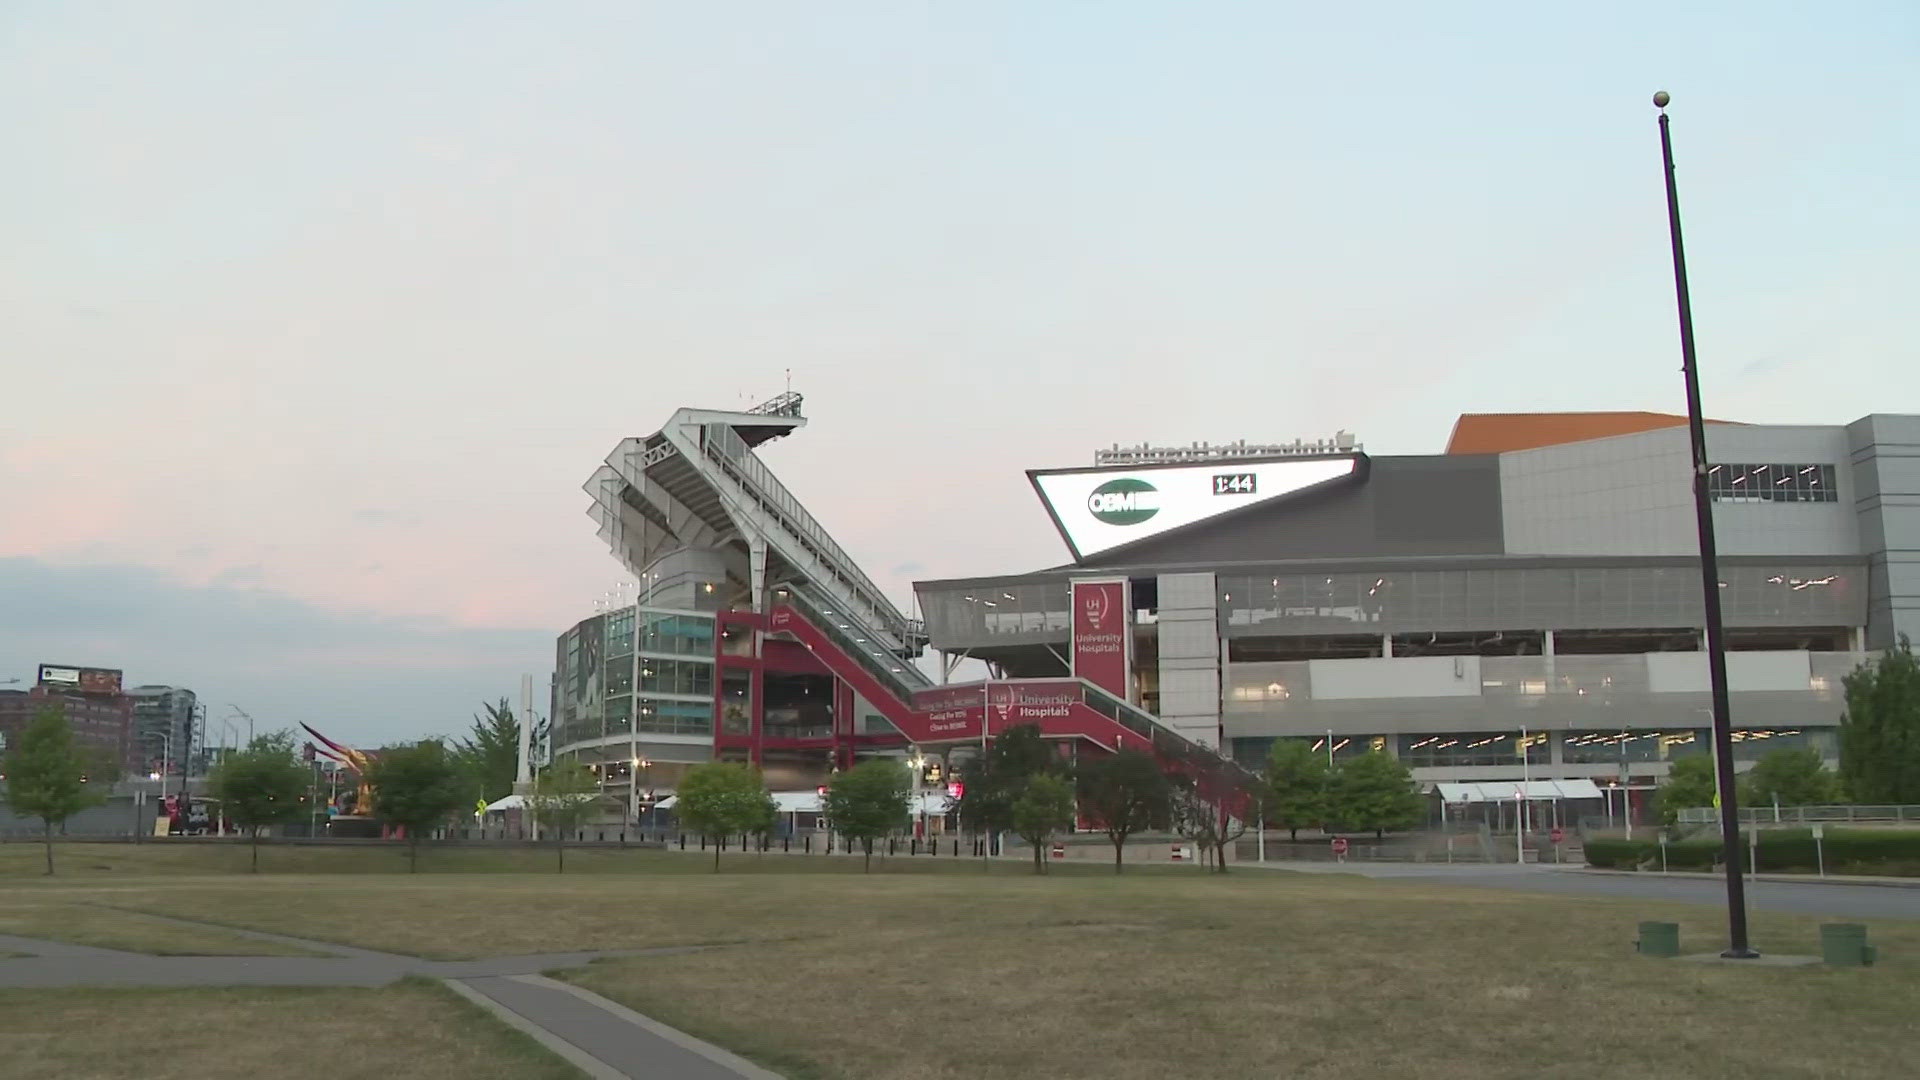 Gates for The Rolling Stones Concert are set to open at Cleveland Browns Stadium at 6 p.m. The show will start at 8 p.m.